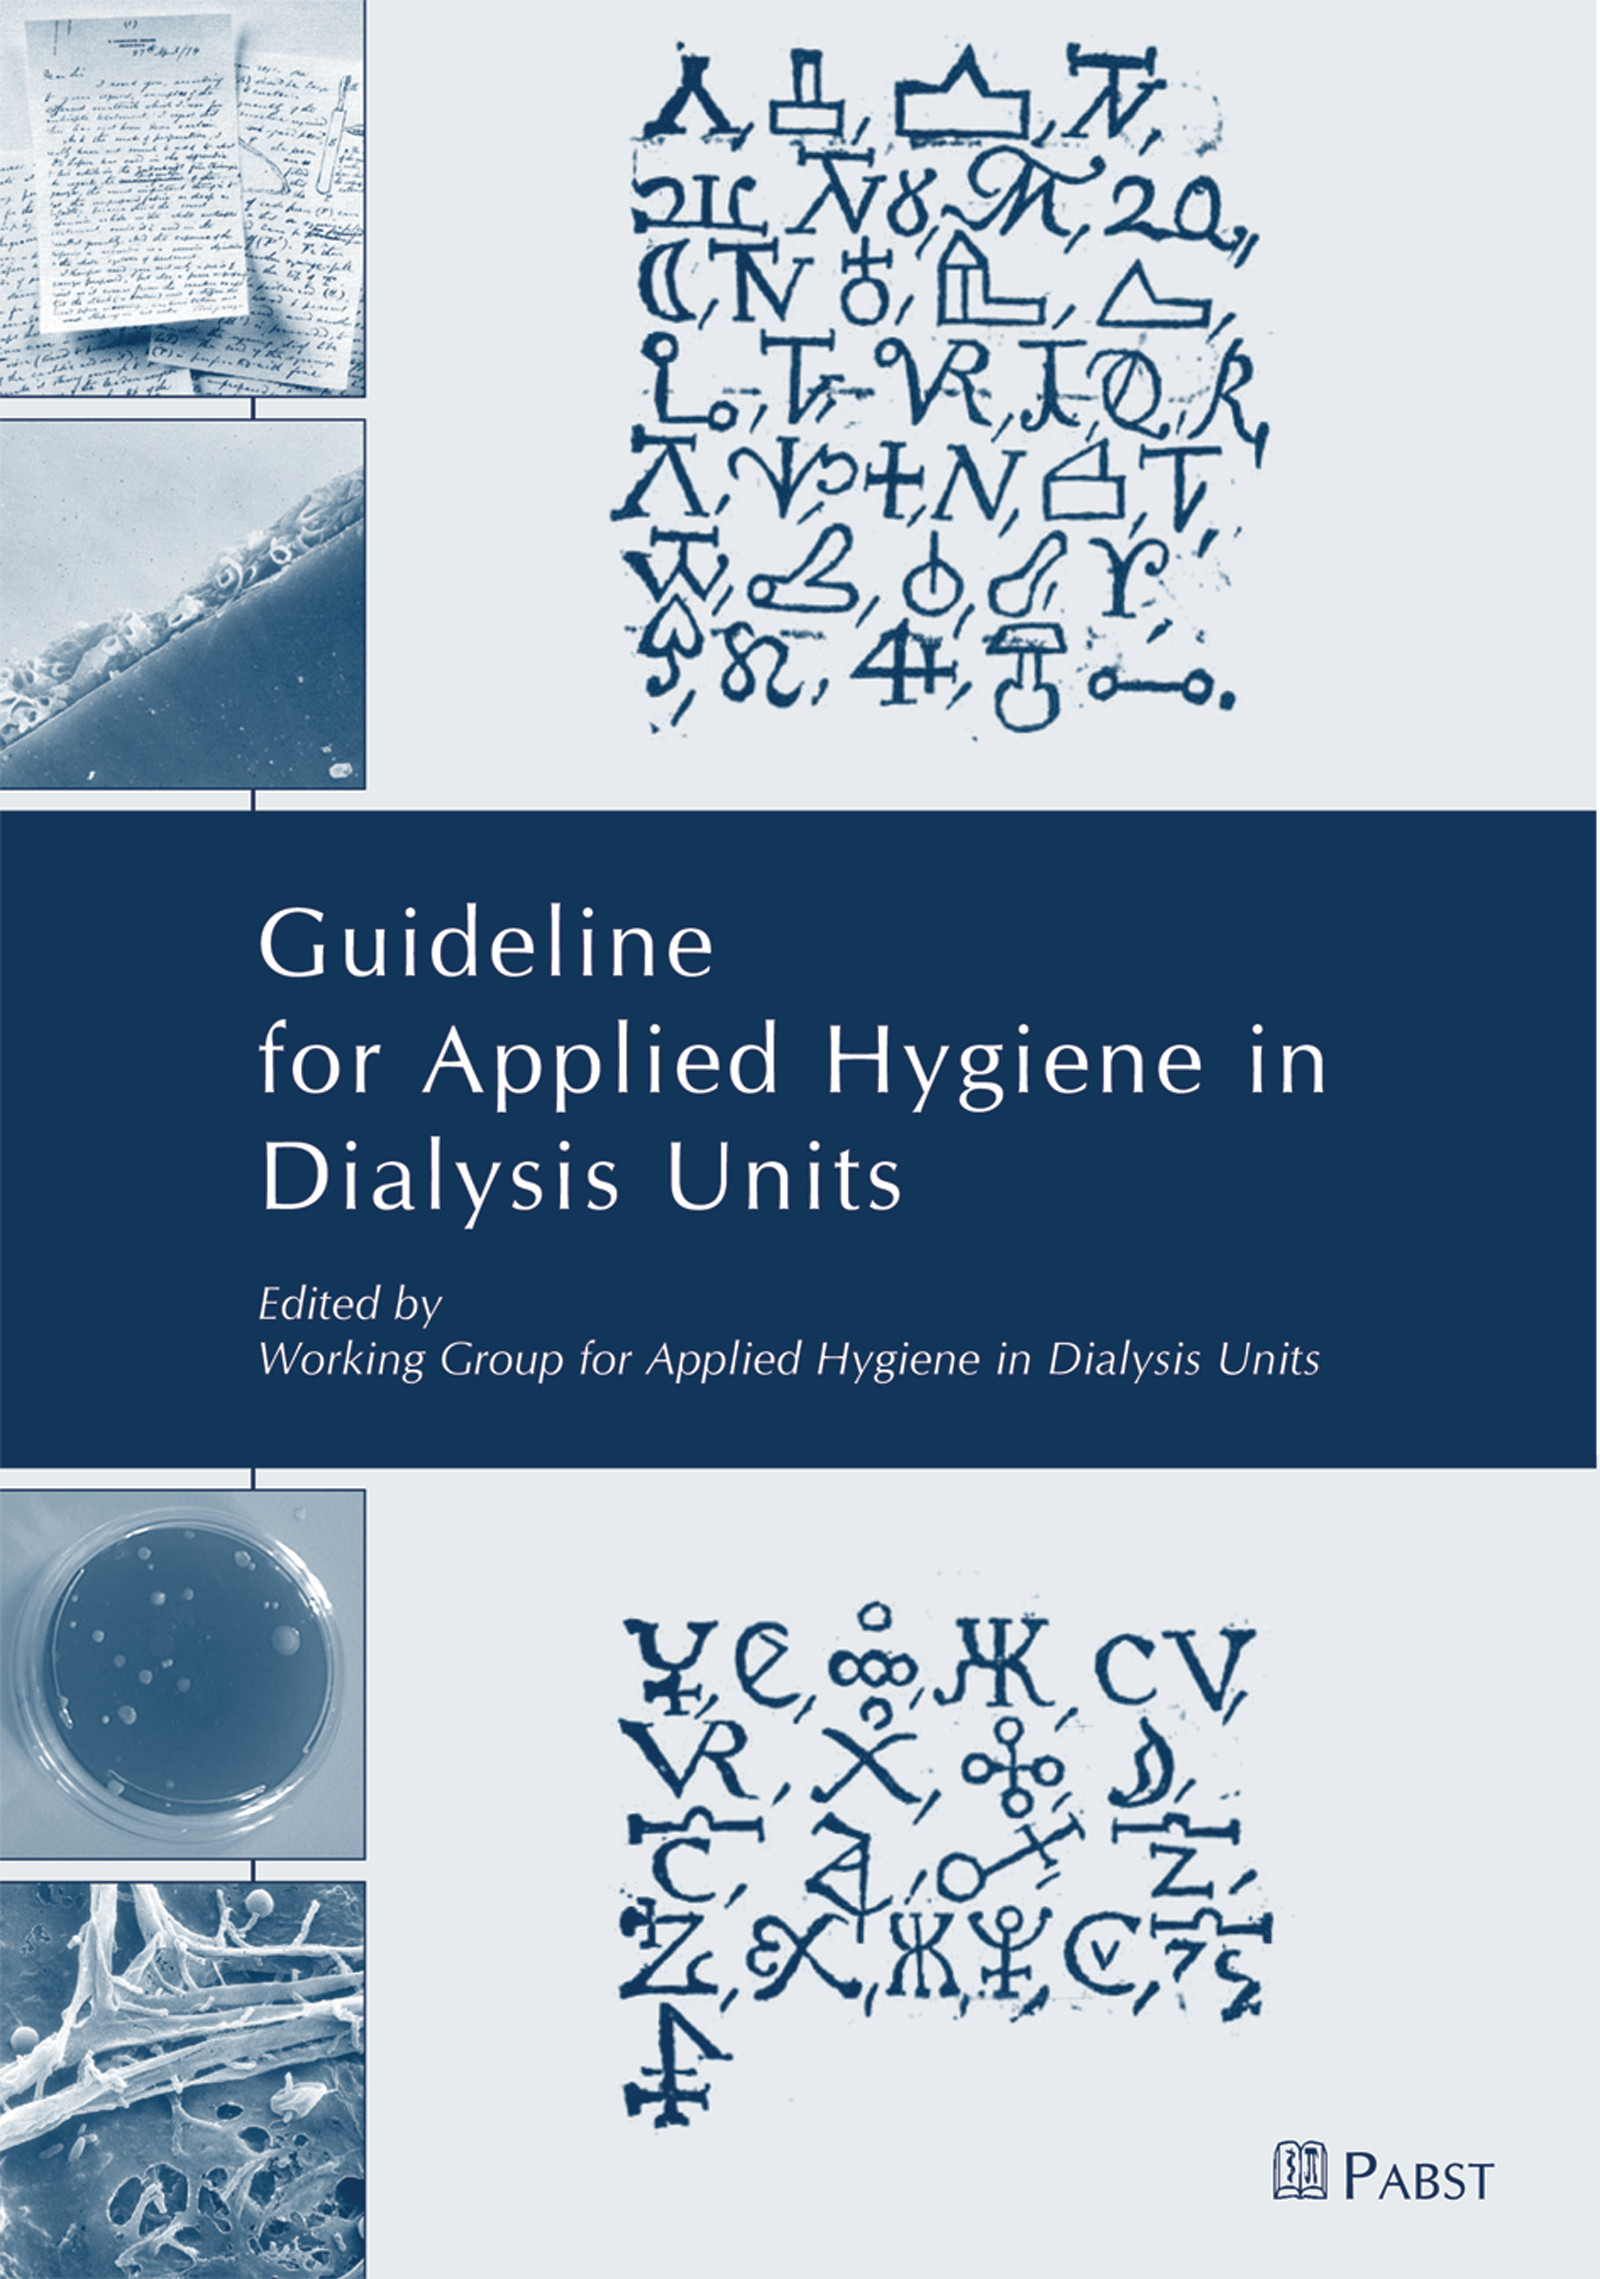 Guideline for Applied Hygiene in Dialysis Units